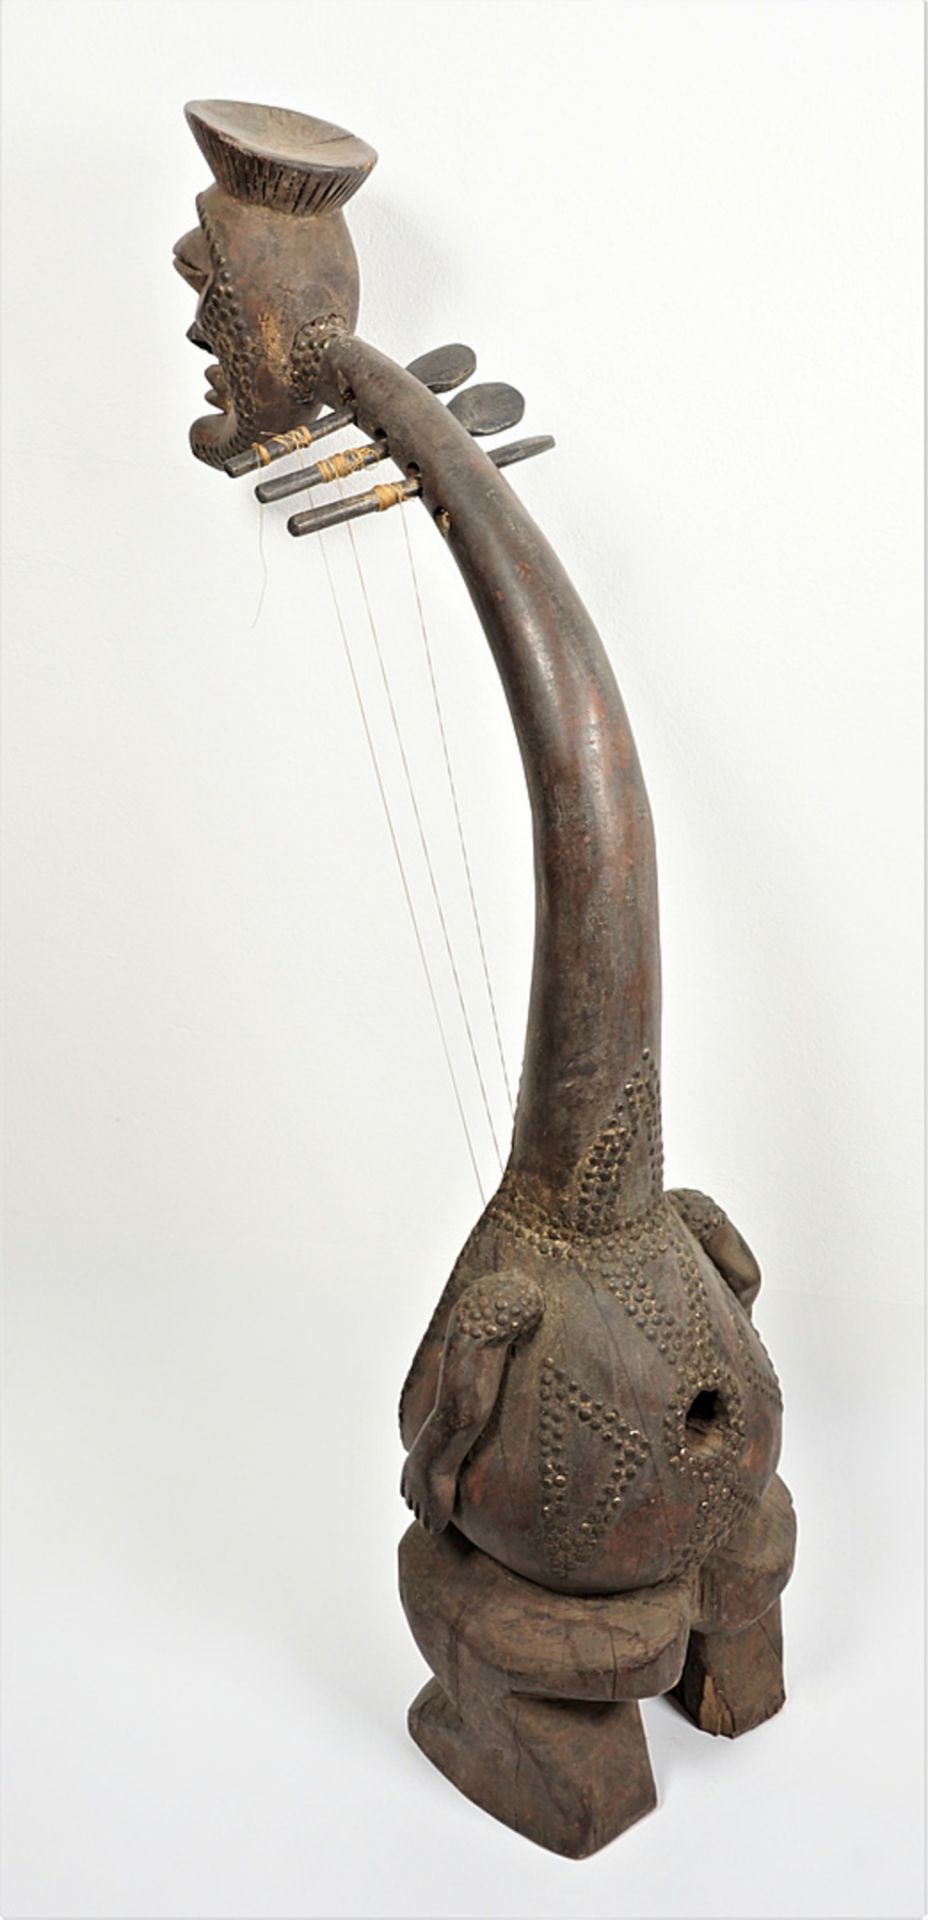 Figurative musical instrument similar to a kundi, DR Congo - Image 3 of 4